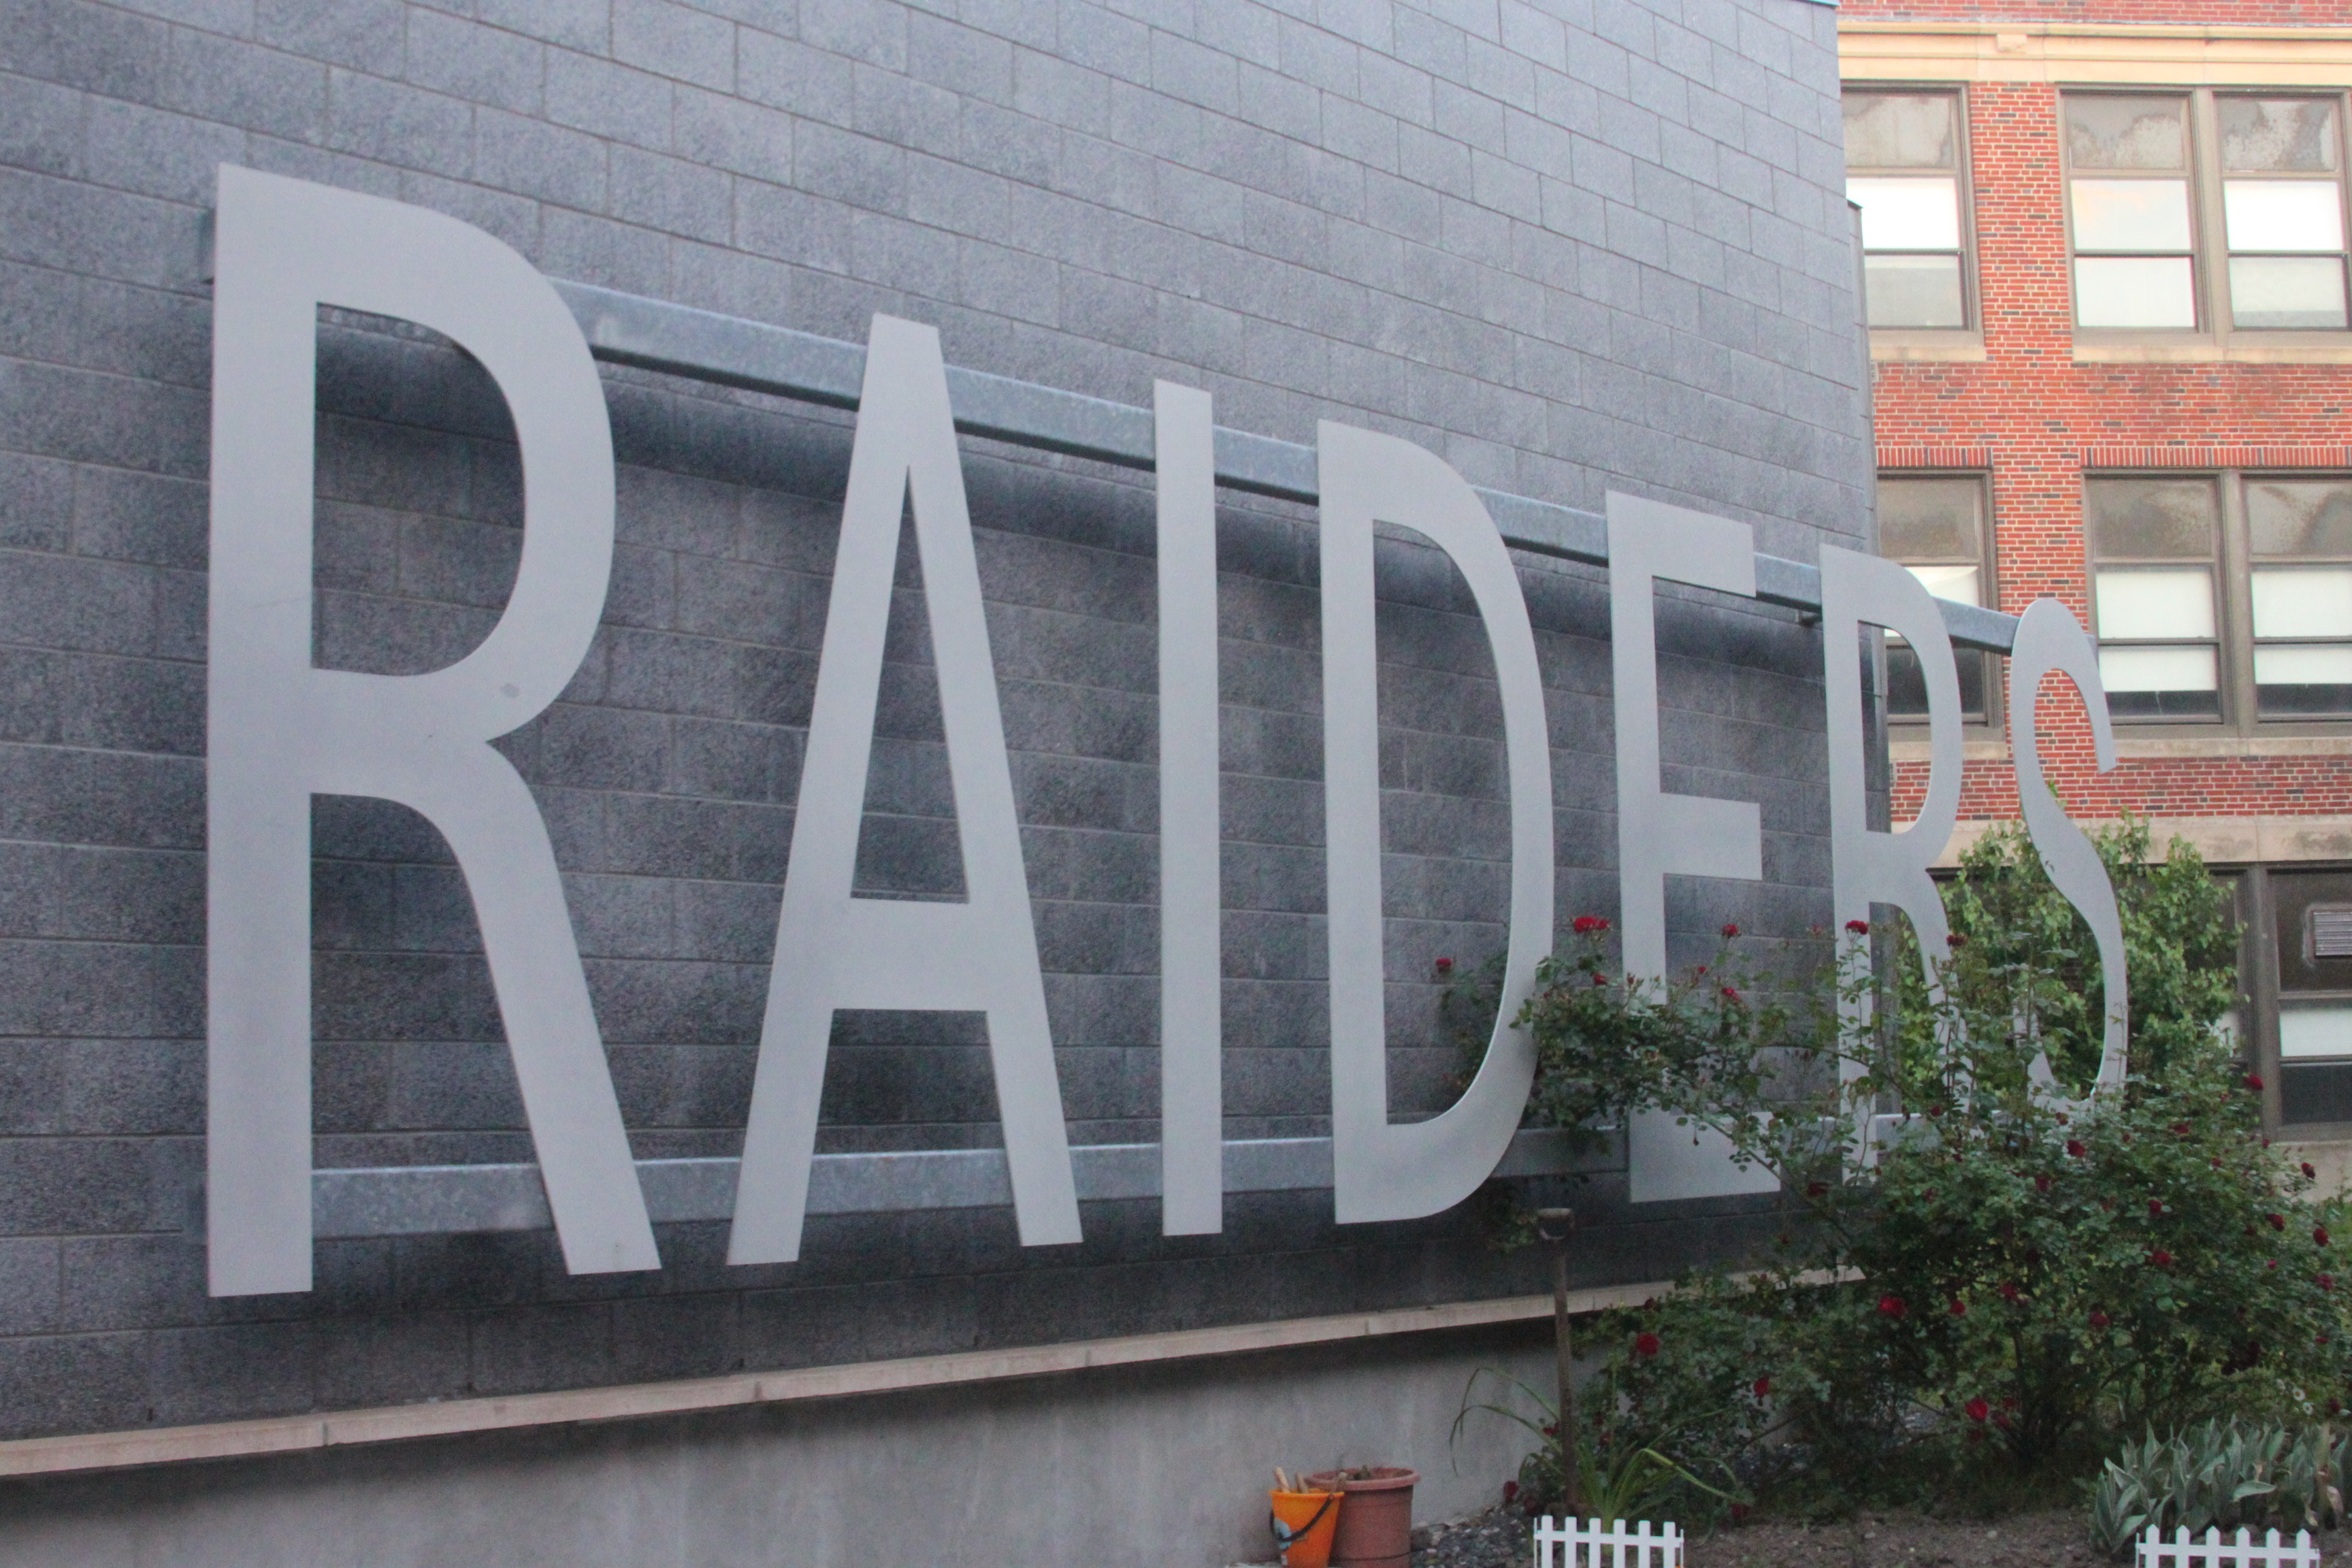 A sign inside an atrium at Watertown High School displaying the current mascot - the Raiders.